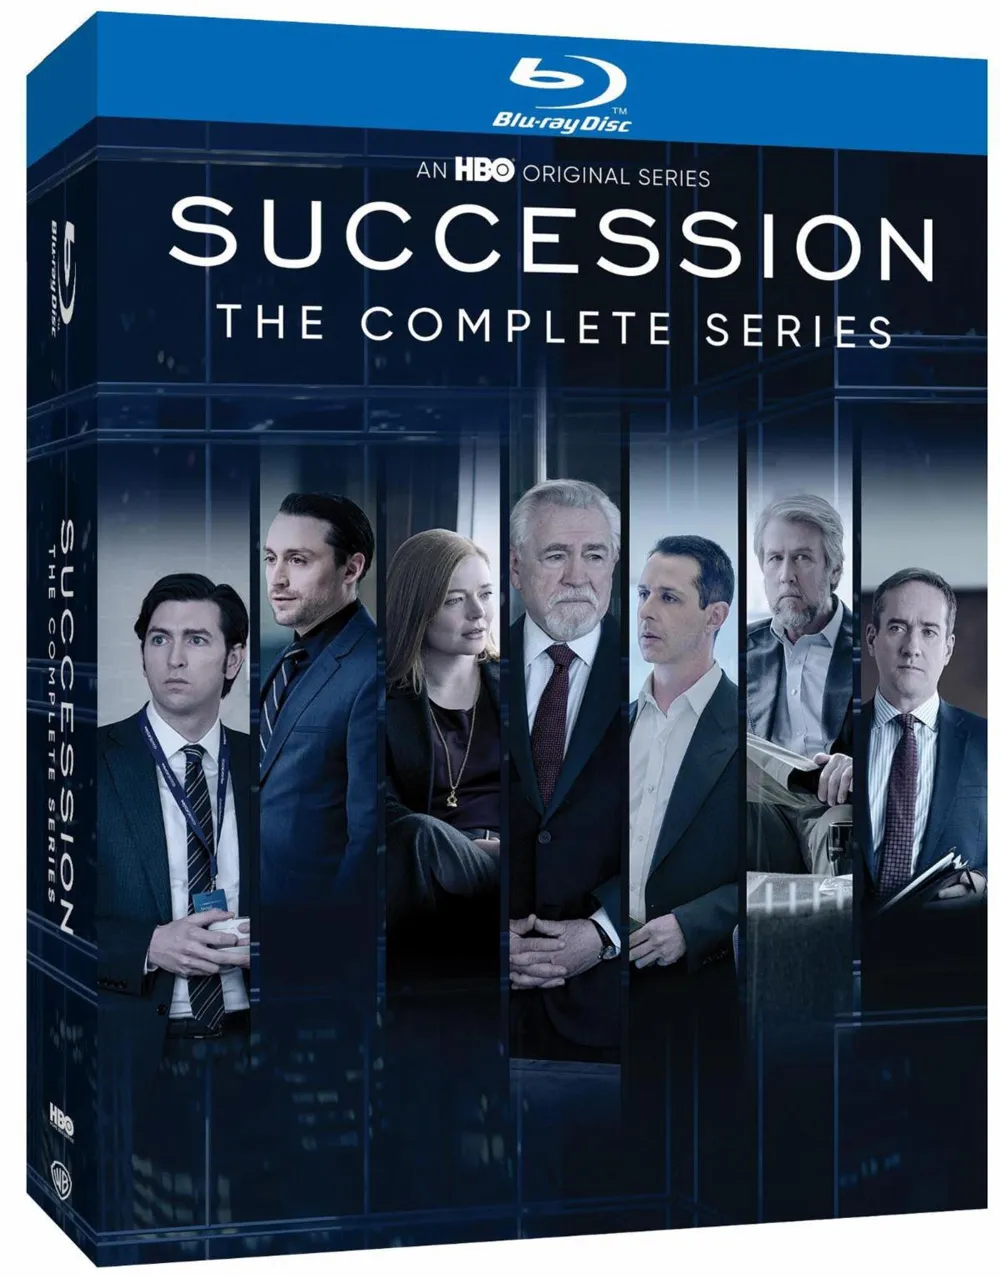 'Succession: The Complete Series' Gets August Blu-ray Release Date